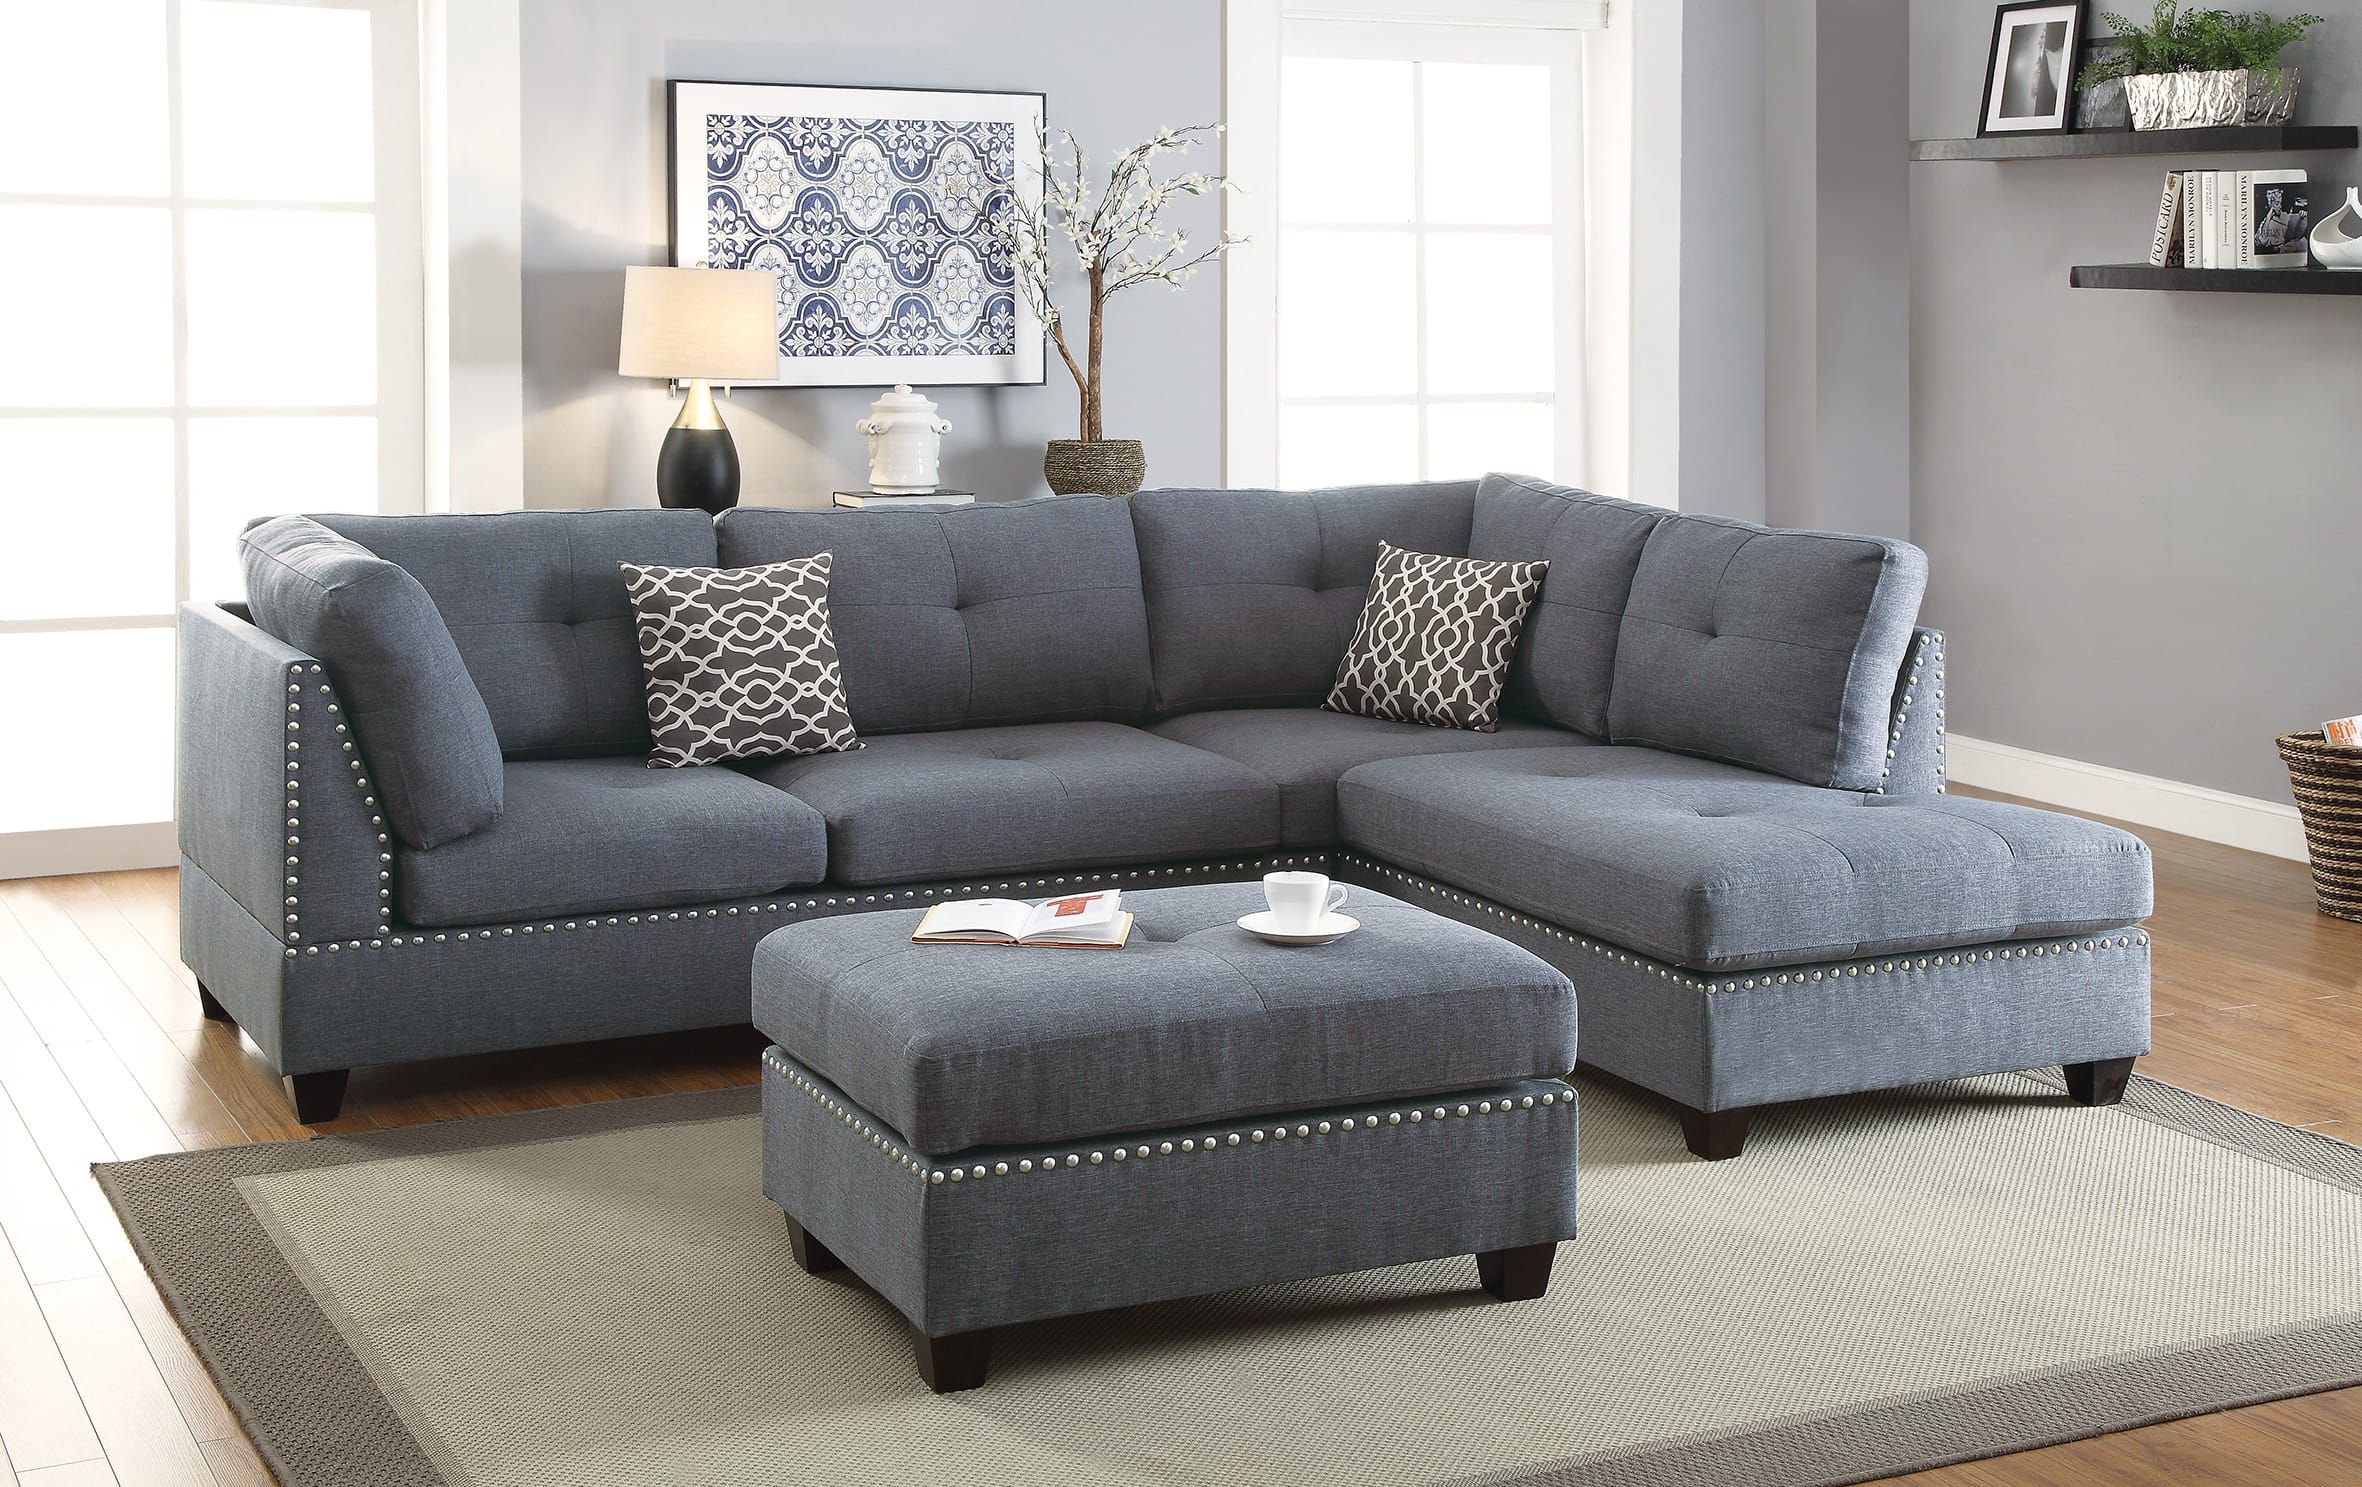 F6975 Blue Gray 3 Pcs Sectional Sofa Setpoundex Intended For Sofas In Bluish Grey (Gallery 2 of 20)